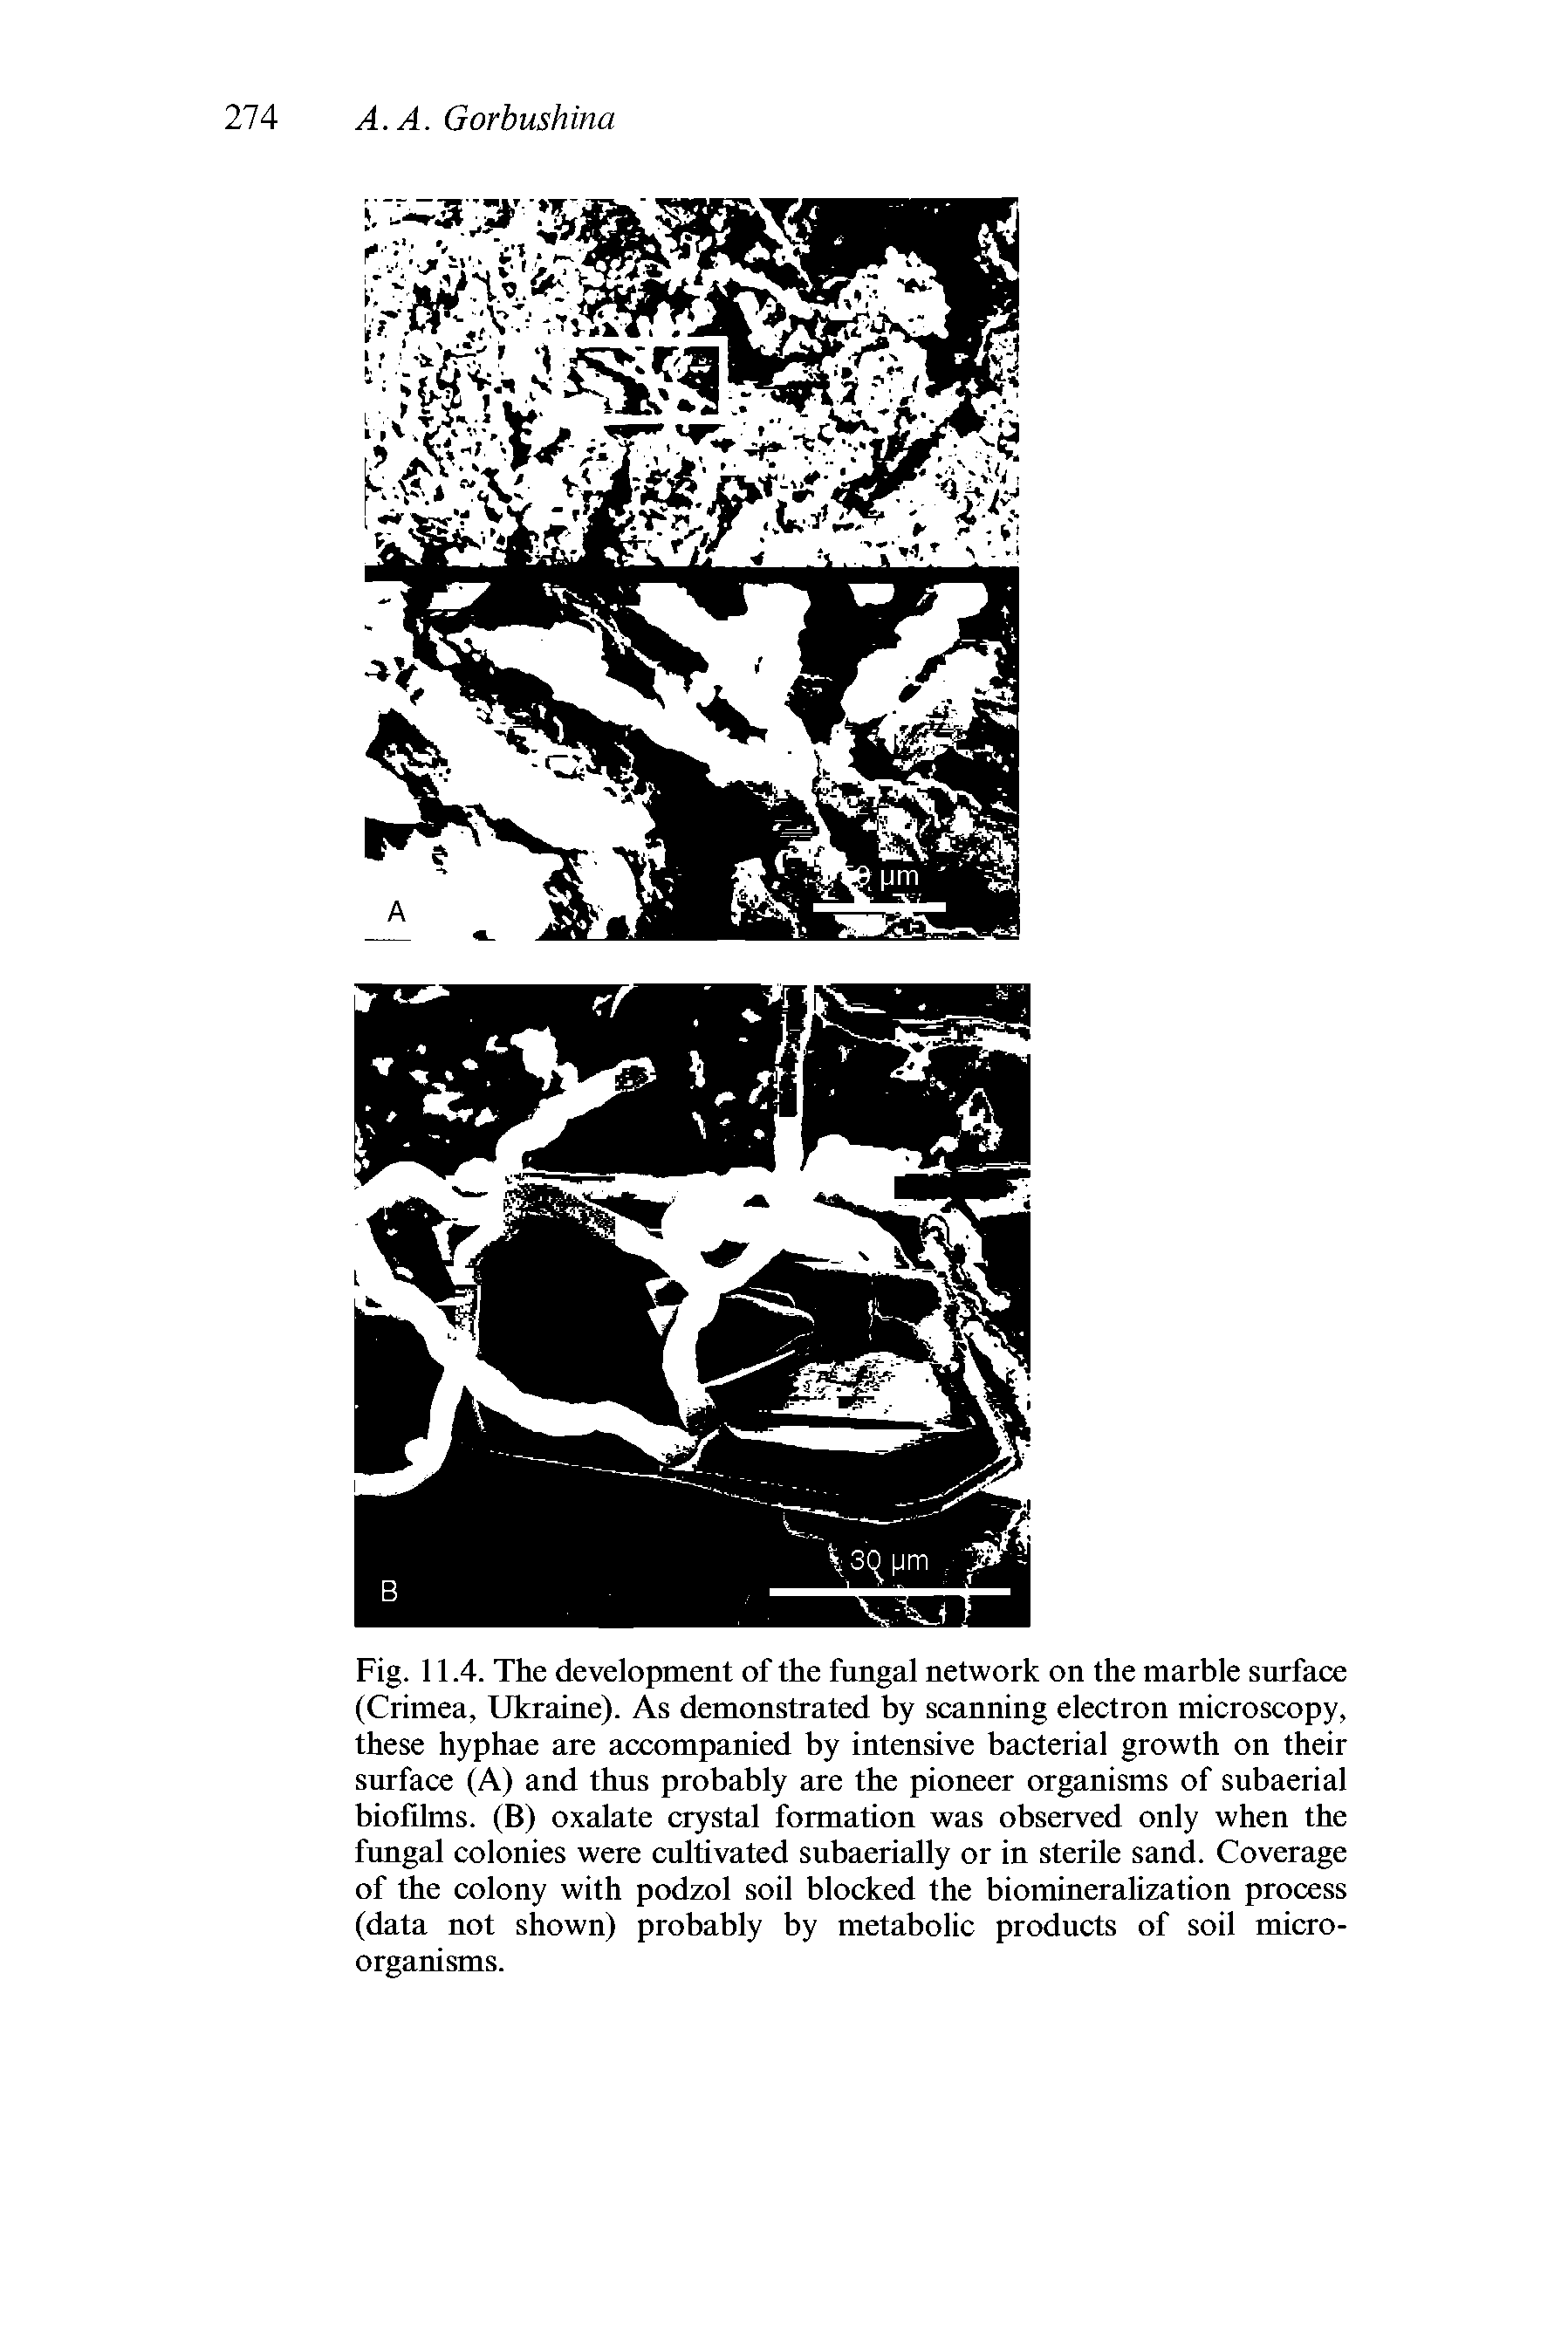 Fig. 11.4. The development of the fungal network on the marble surface (Crimea, Ukraine). As demonstrated by scanning electron microscopy, these hyphae are accompanied by intensive bacterial growth on their surface (A) and thus probably are the pioneer organisms of subaerial biofilms. (B) oxalate crystal formation was observed only when the fungal colonies were cultivated subaerially or in sterile sand. Coverage of the colony with podzol soil blocked the biomineralization process (data not shown) probably by metabolic products of soil microorganisms.